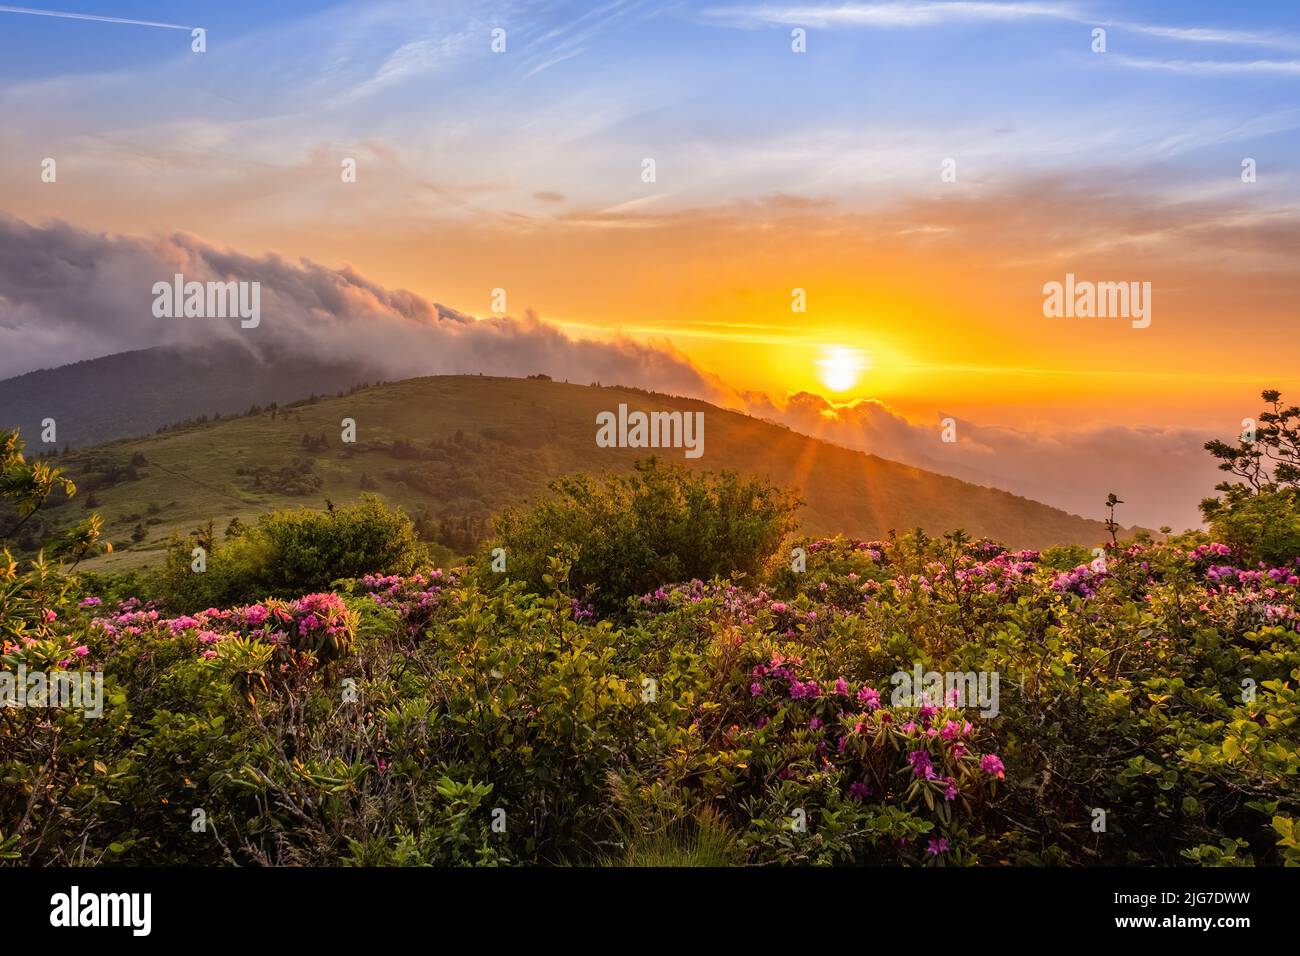 Sunset over the mountains and rhododendrons at Roan Mountain State Park in Tennessee. Stock Photo